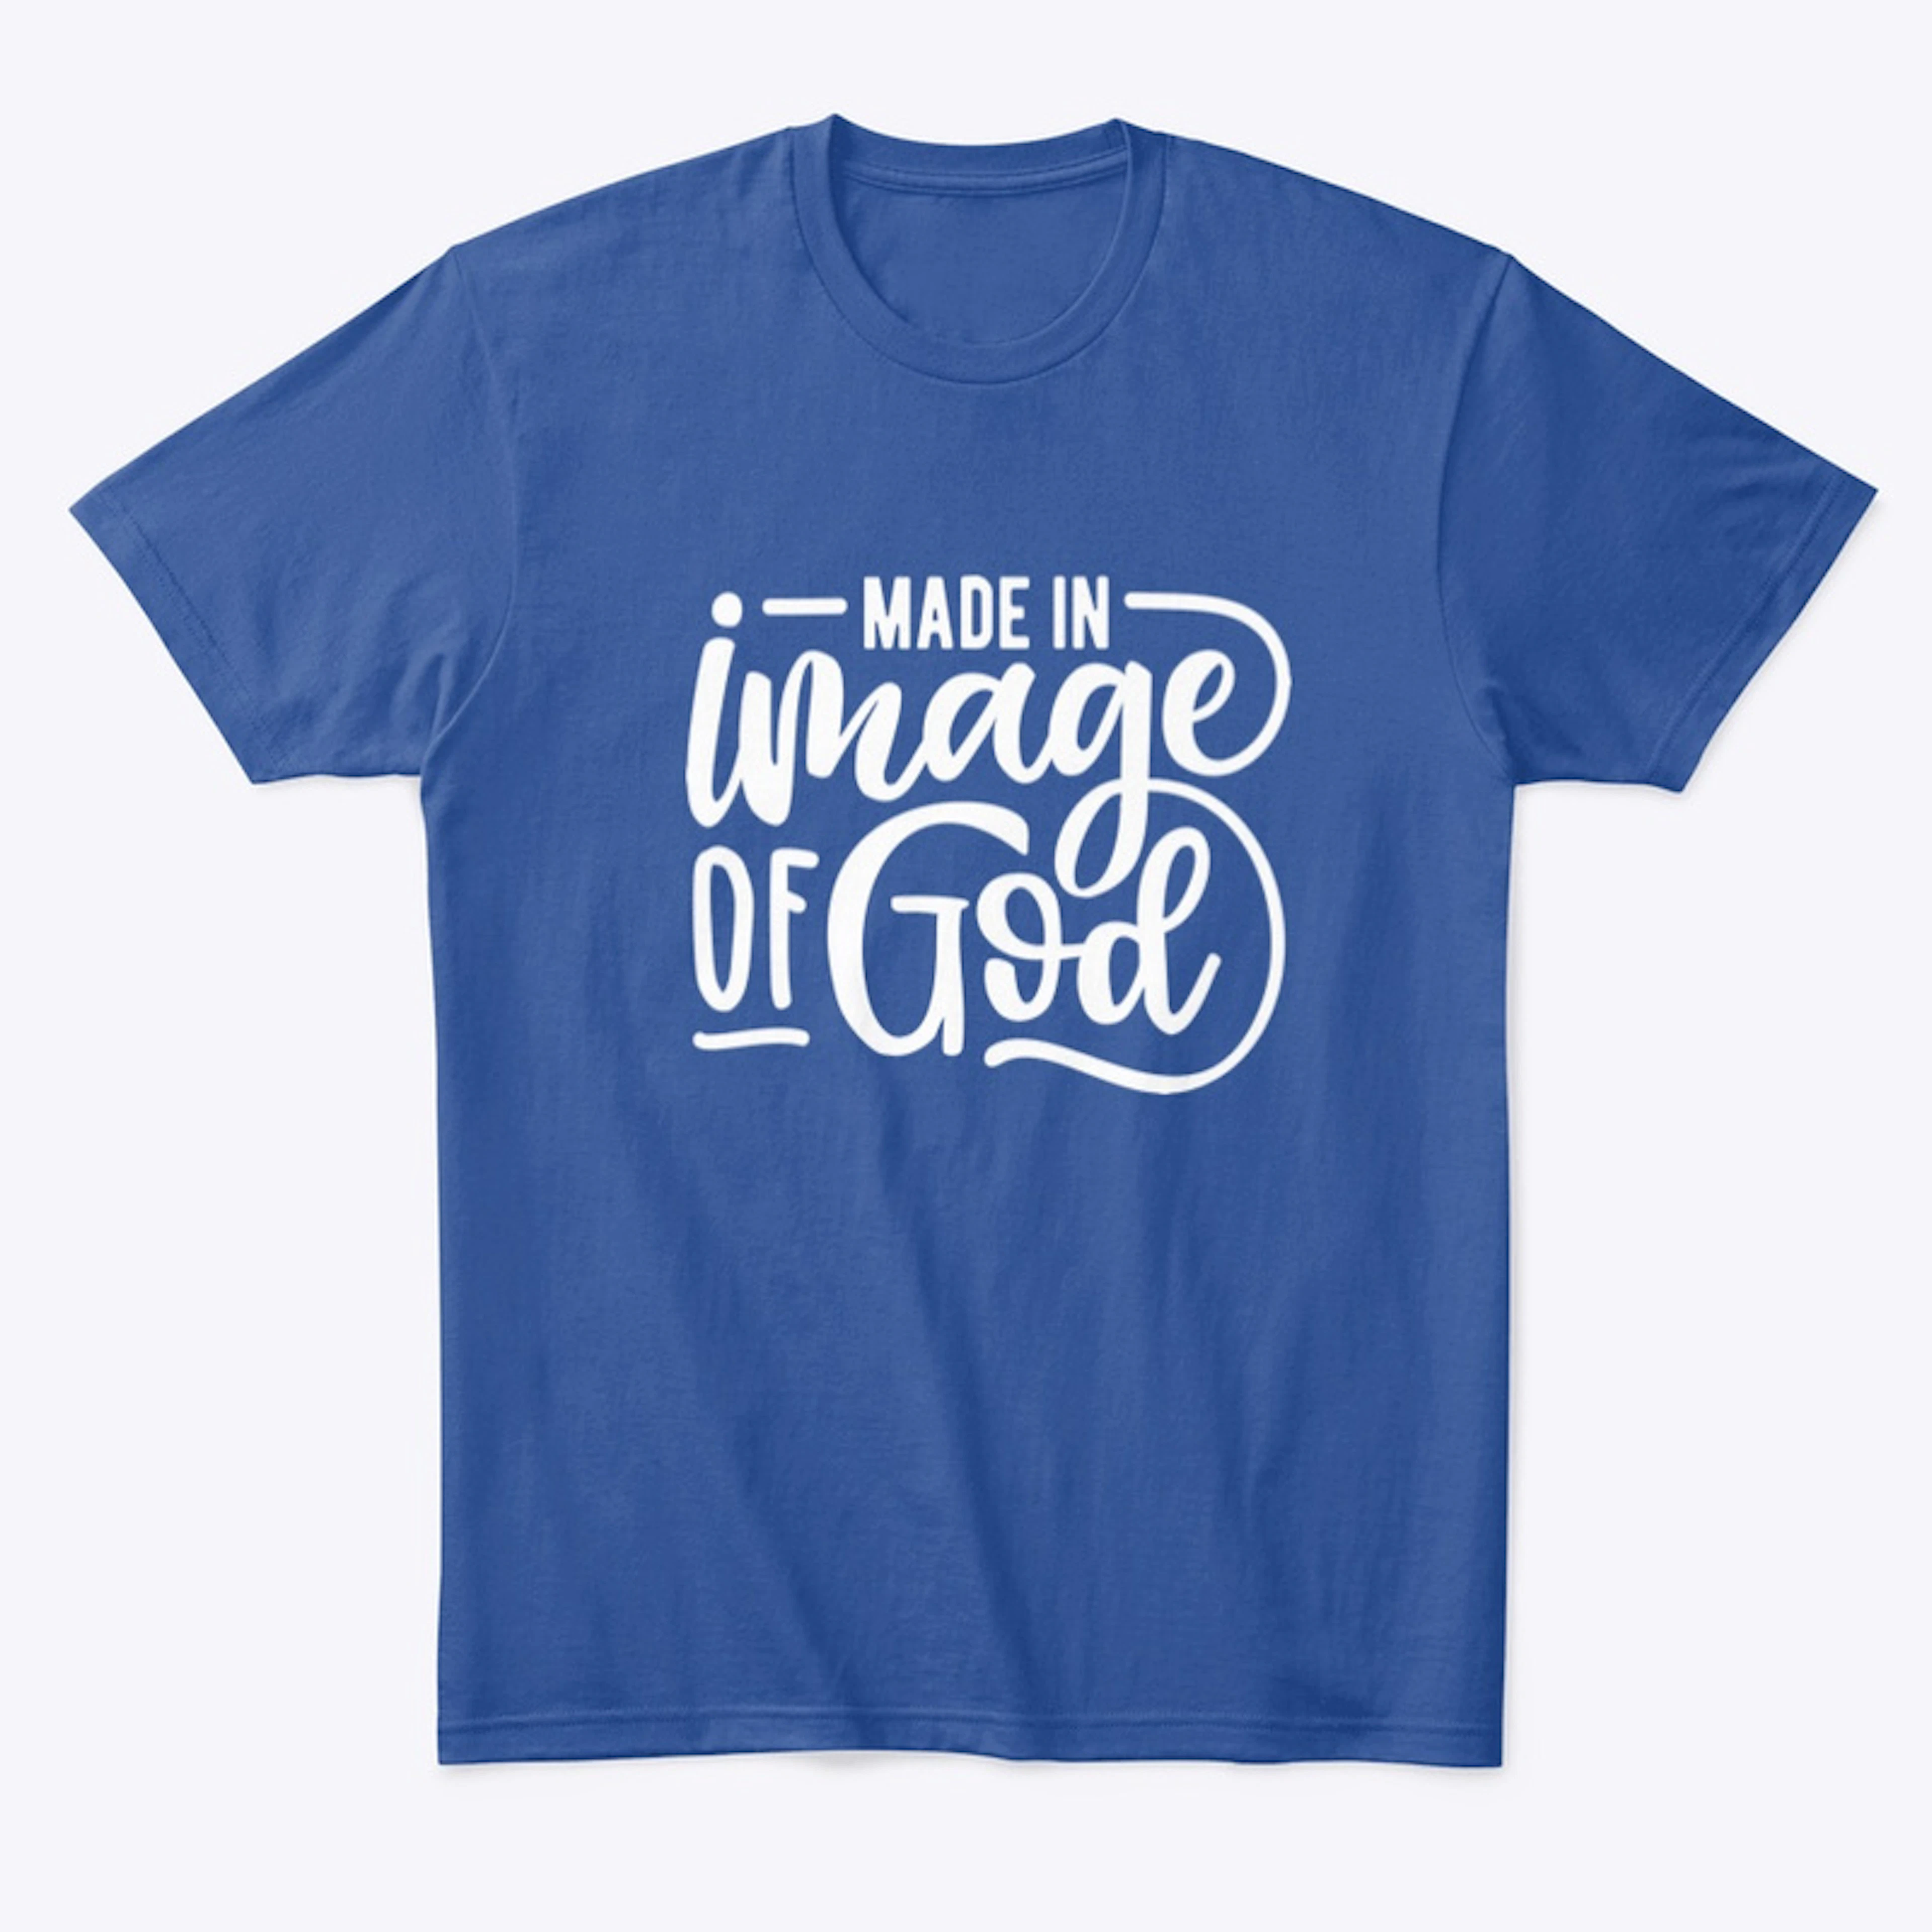 "Made In Image Of God"